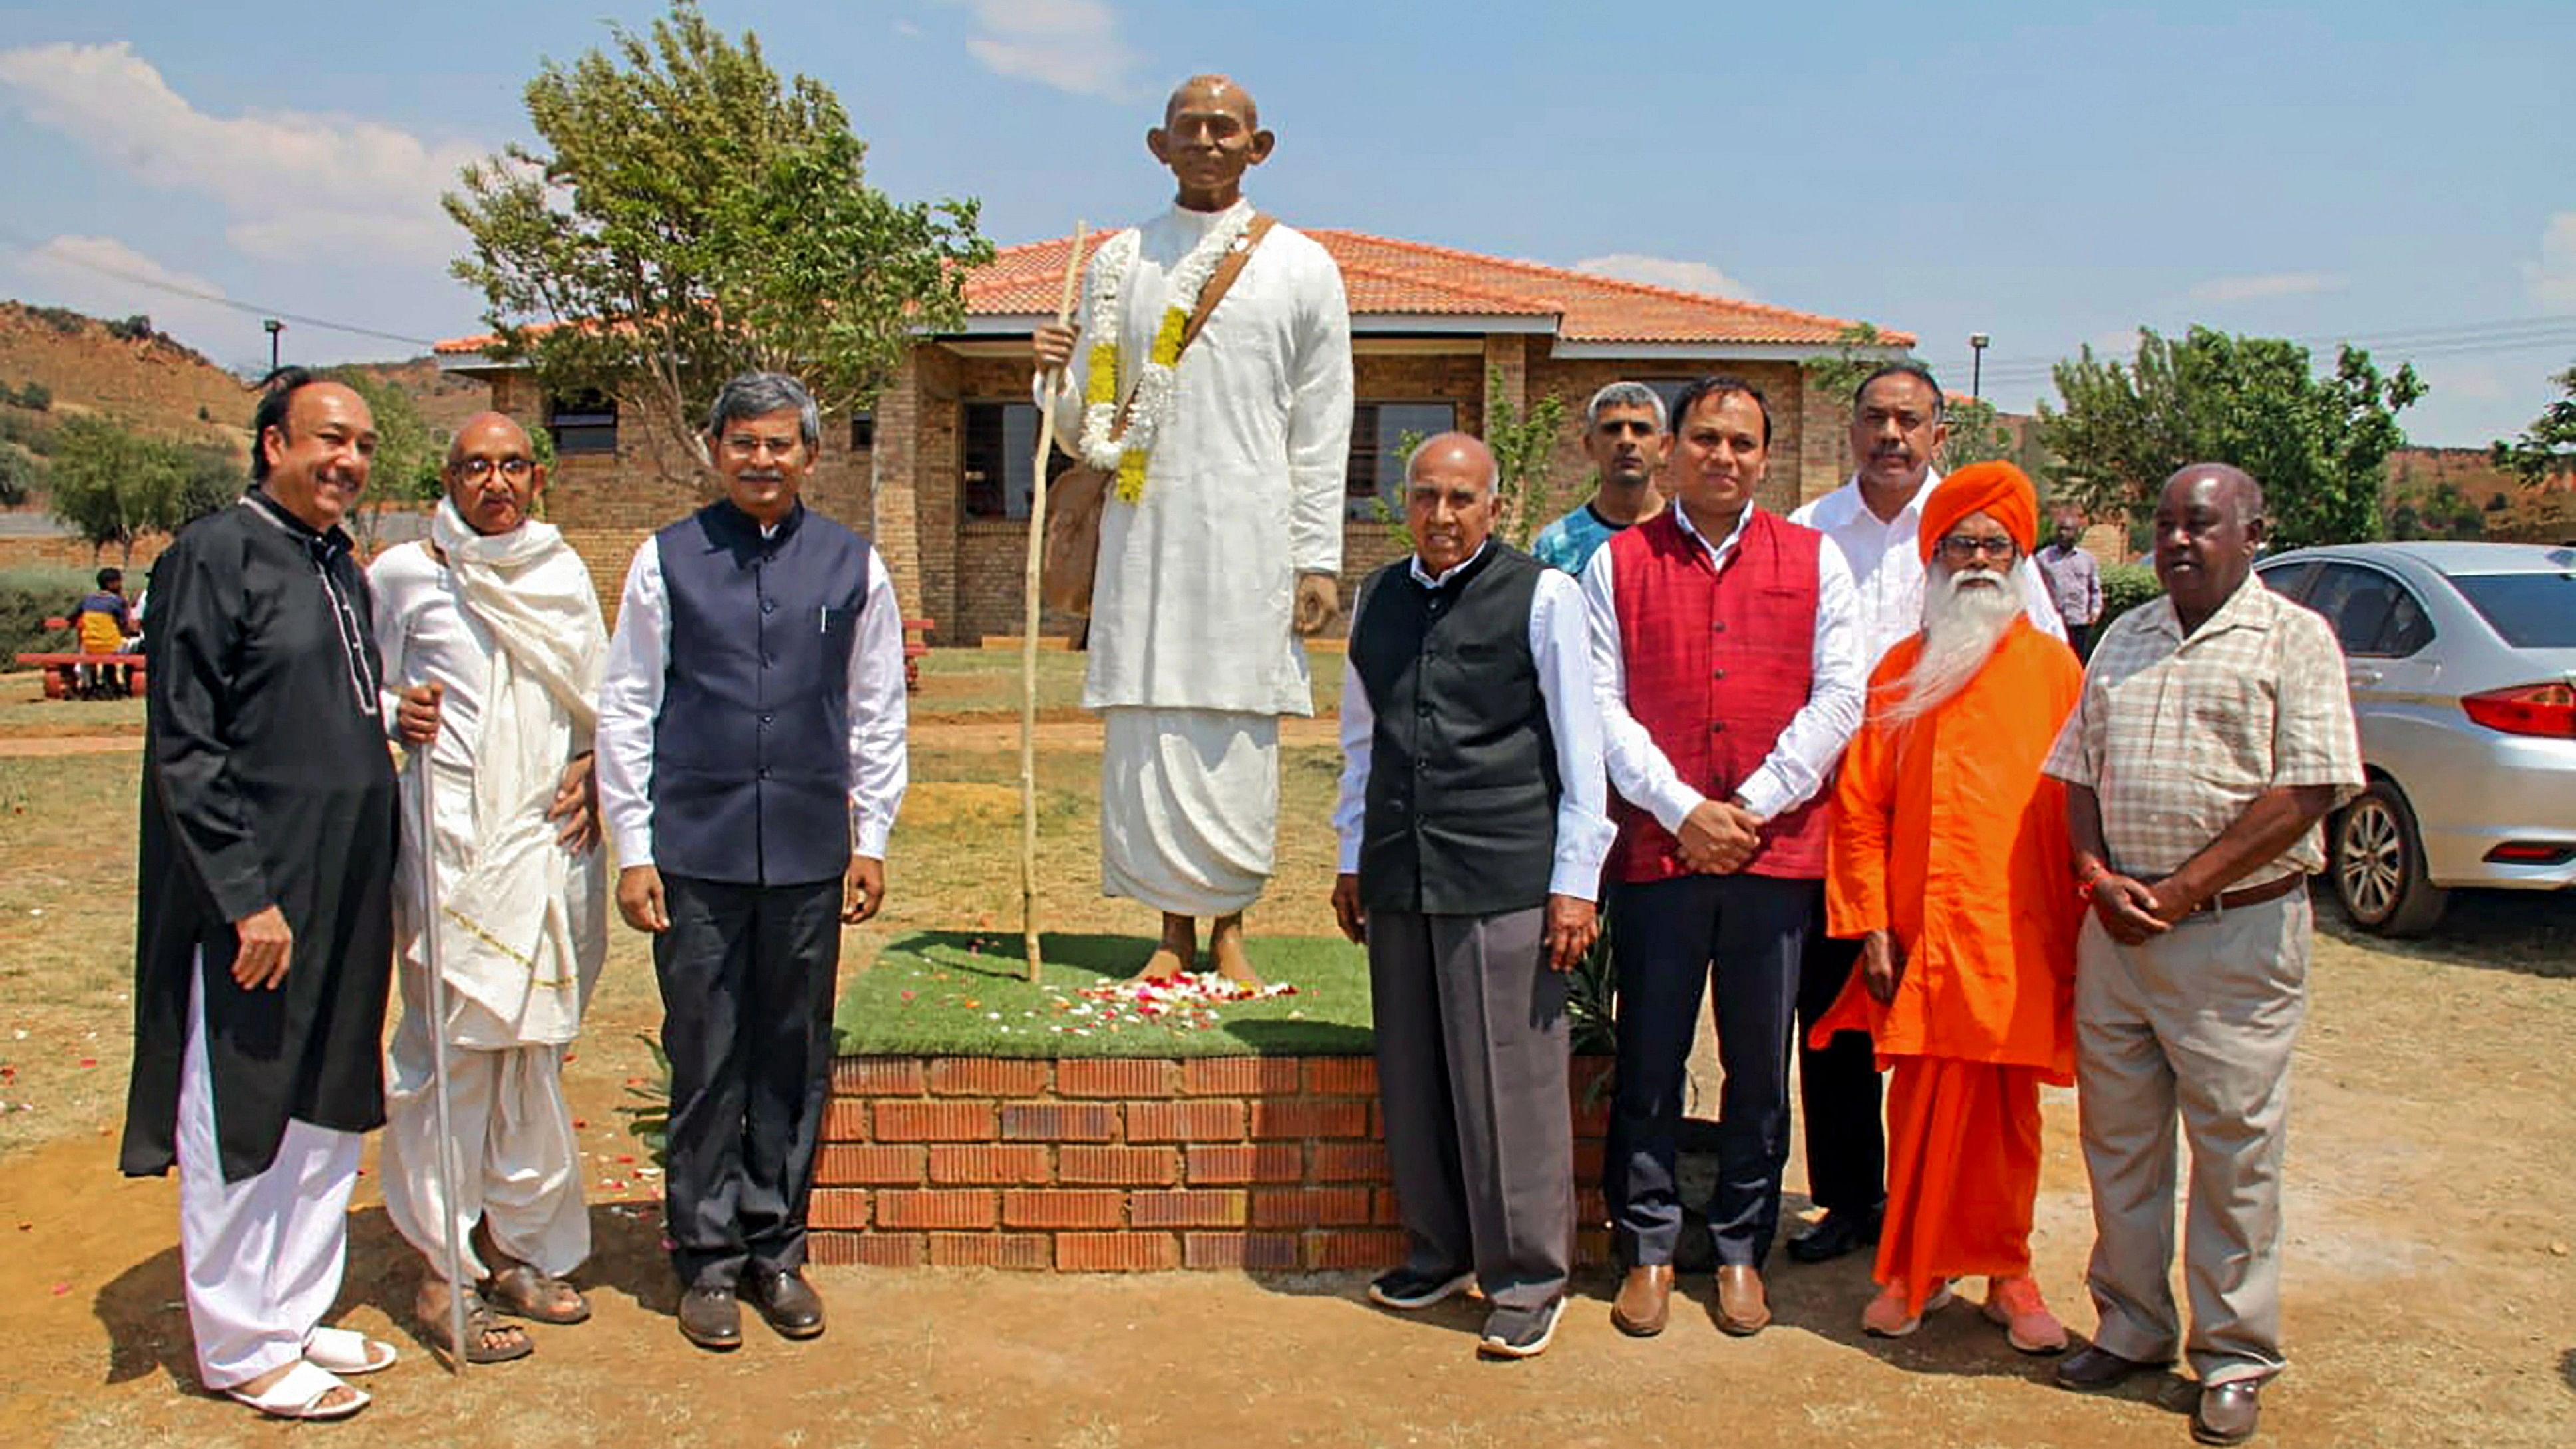 <div class="paragraphs"><p>High Commissioner of India to South Africa Prabhat Kumar during unveiling of a life-size statue of Mahatma Gandhi in continuation with Gandhi Jayanti celebrations at the Tolstoy Farm, in South Africa. </p></div>